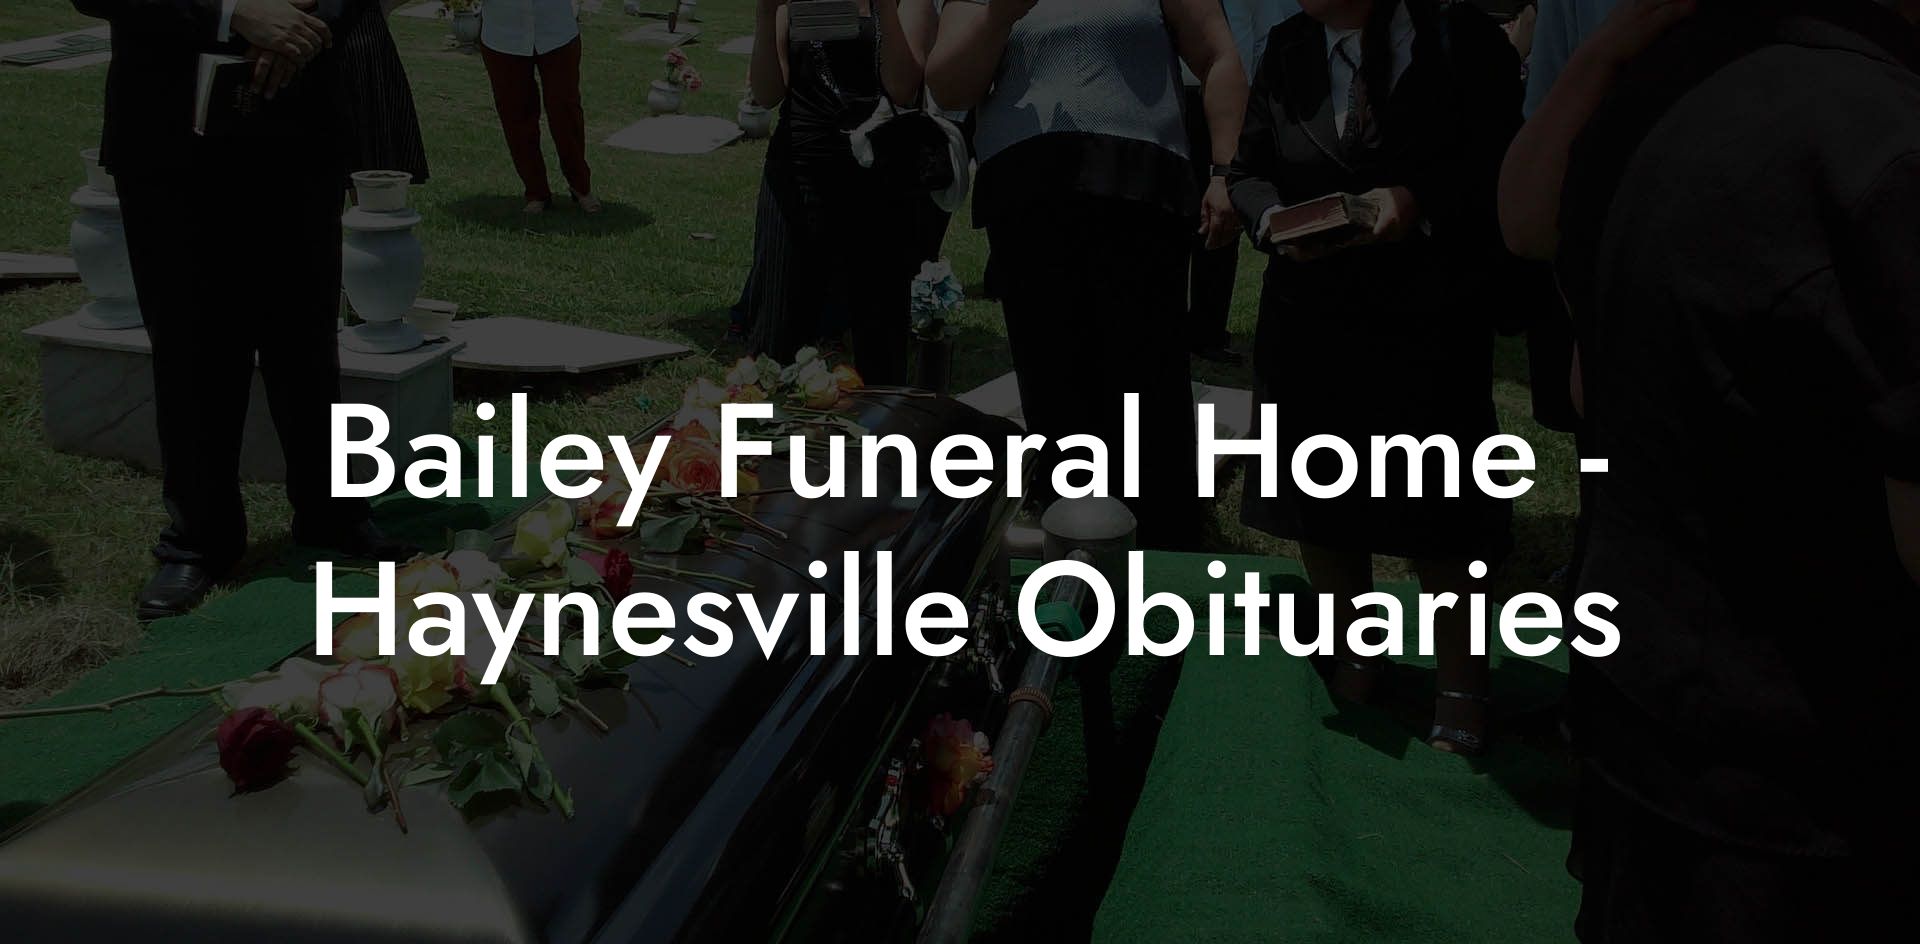 Bailey Funeral Home - Haynesville Obituaries